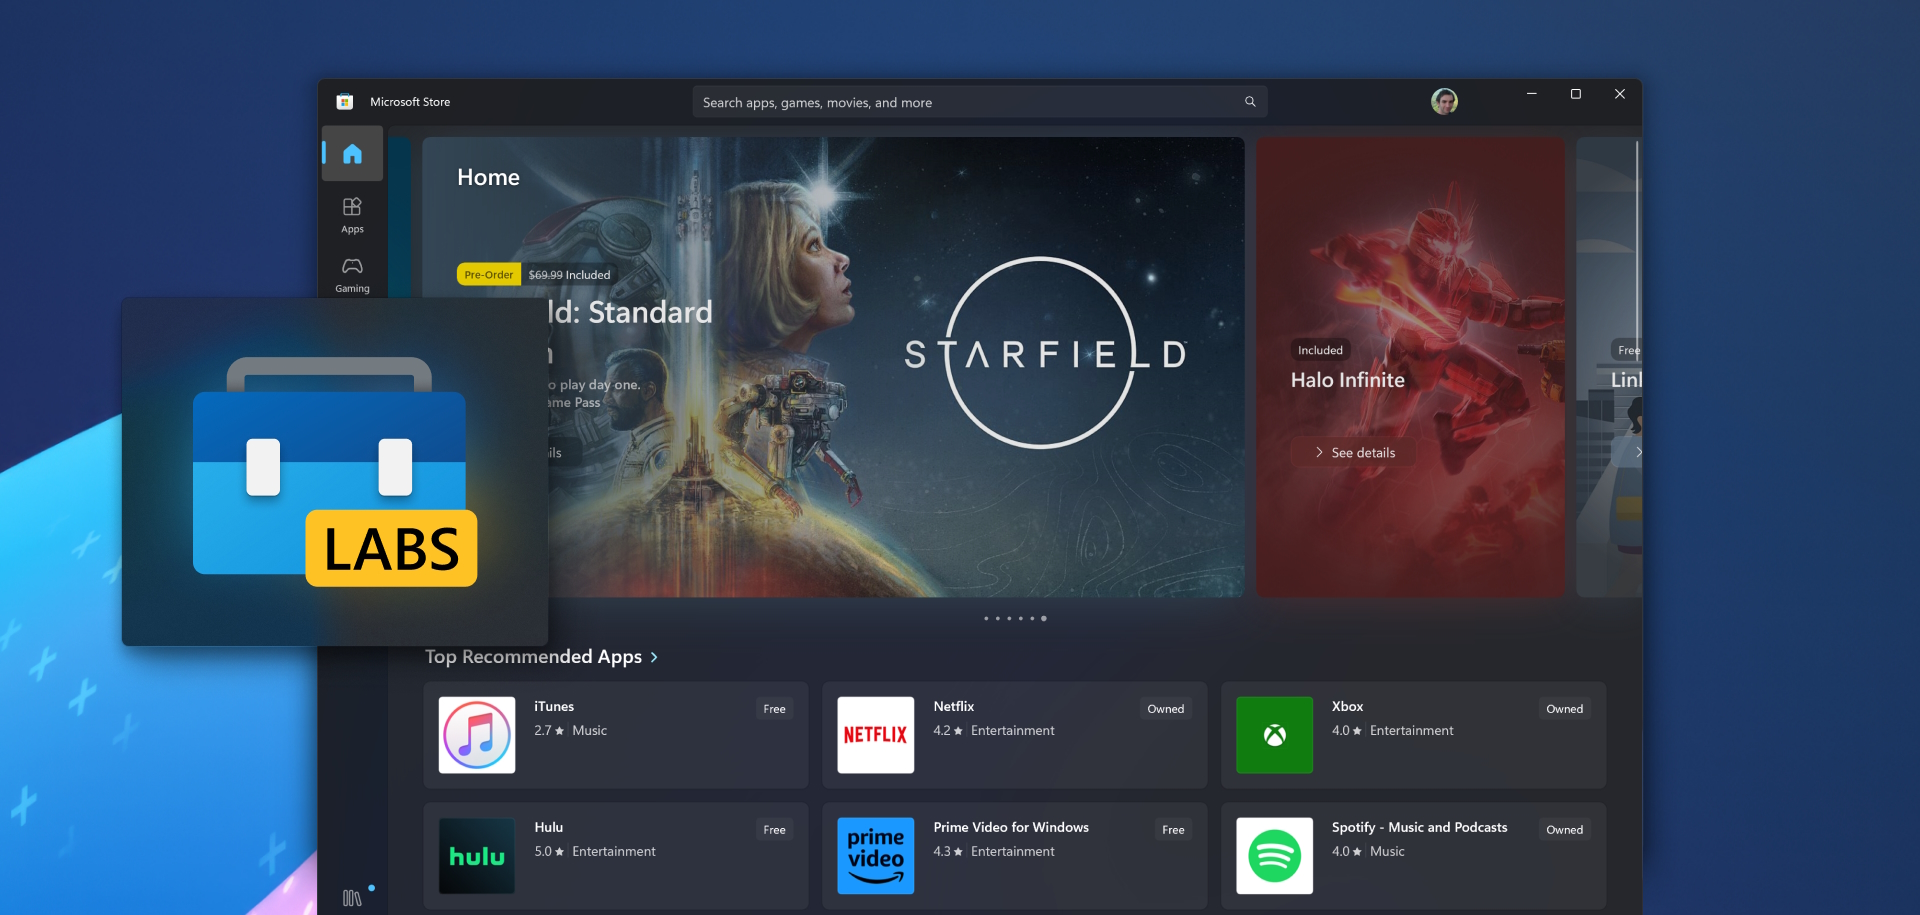 A wallpaper showing a screenshot of the Microsoft Store app, and the Windows Community Toolkit Labs logo over it. The Microsoft Store is opened on the home page, showing Starfield and other games in the spotlight, and some recommended apps like iTubes, Netflix, Hulu and prime Video below.